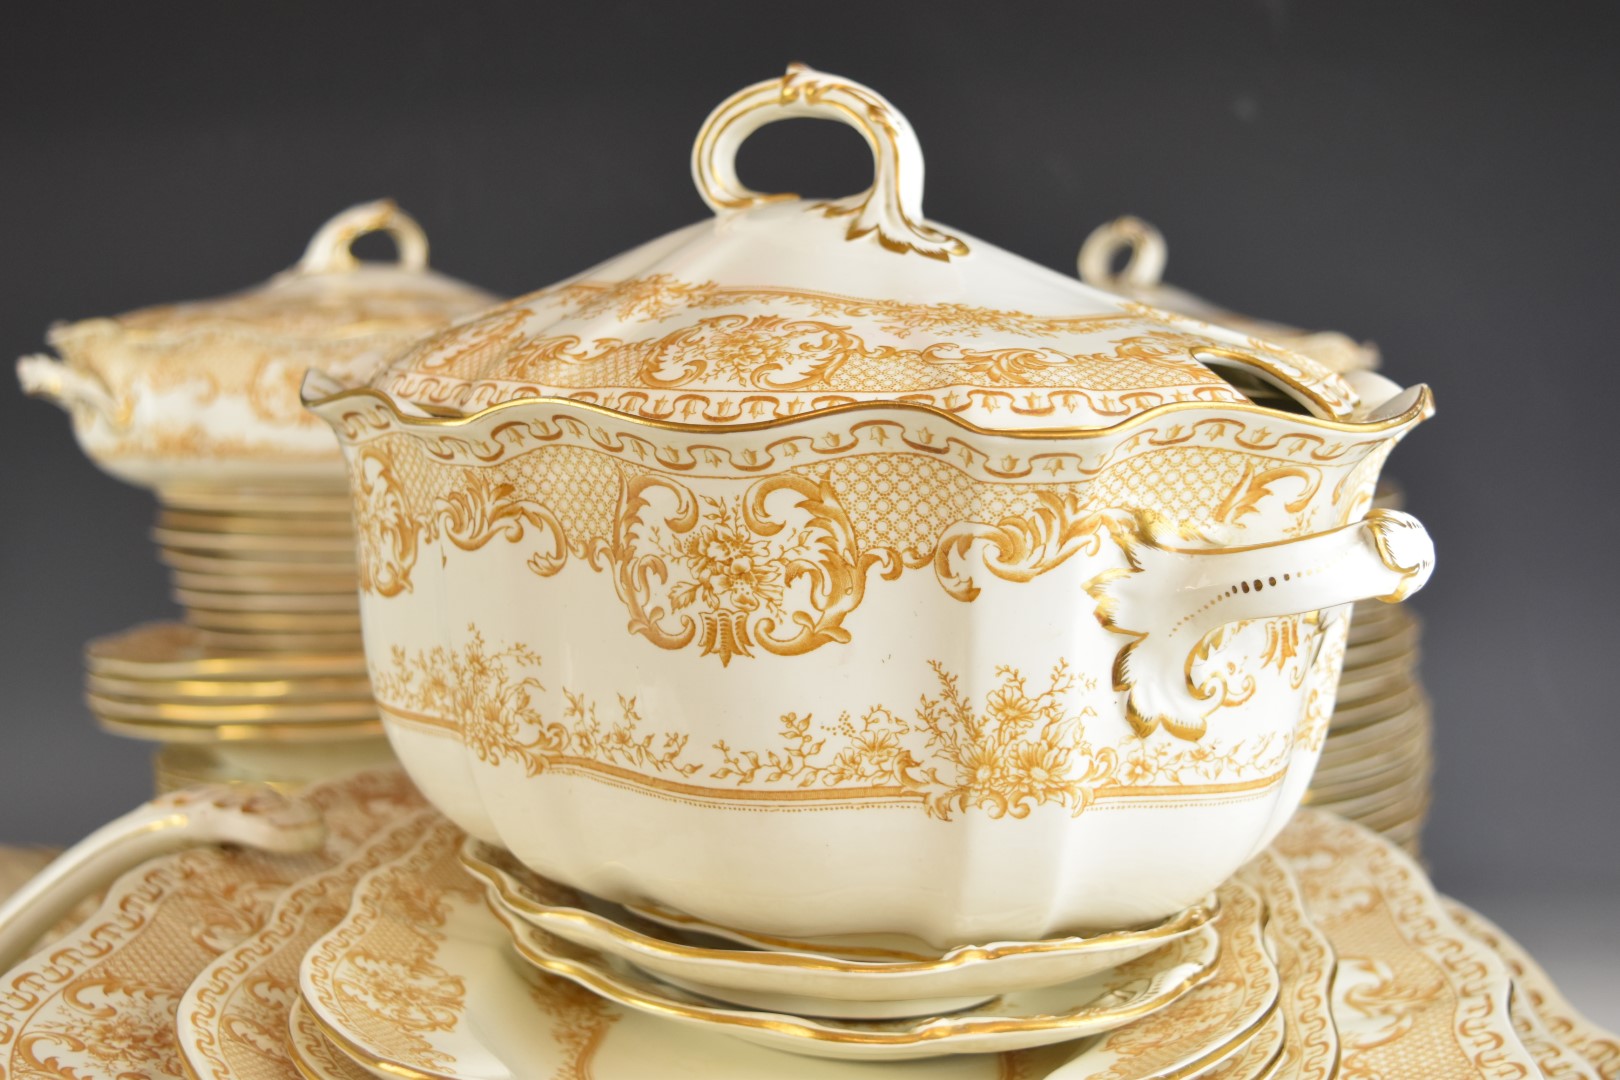 Royal Crown Derby dinner service including tureens, dinner plates and graduated meat plates, - Image 2 of 14